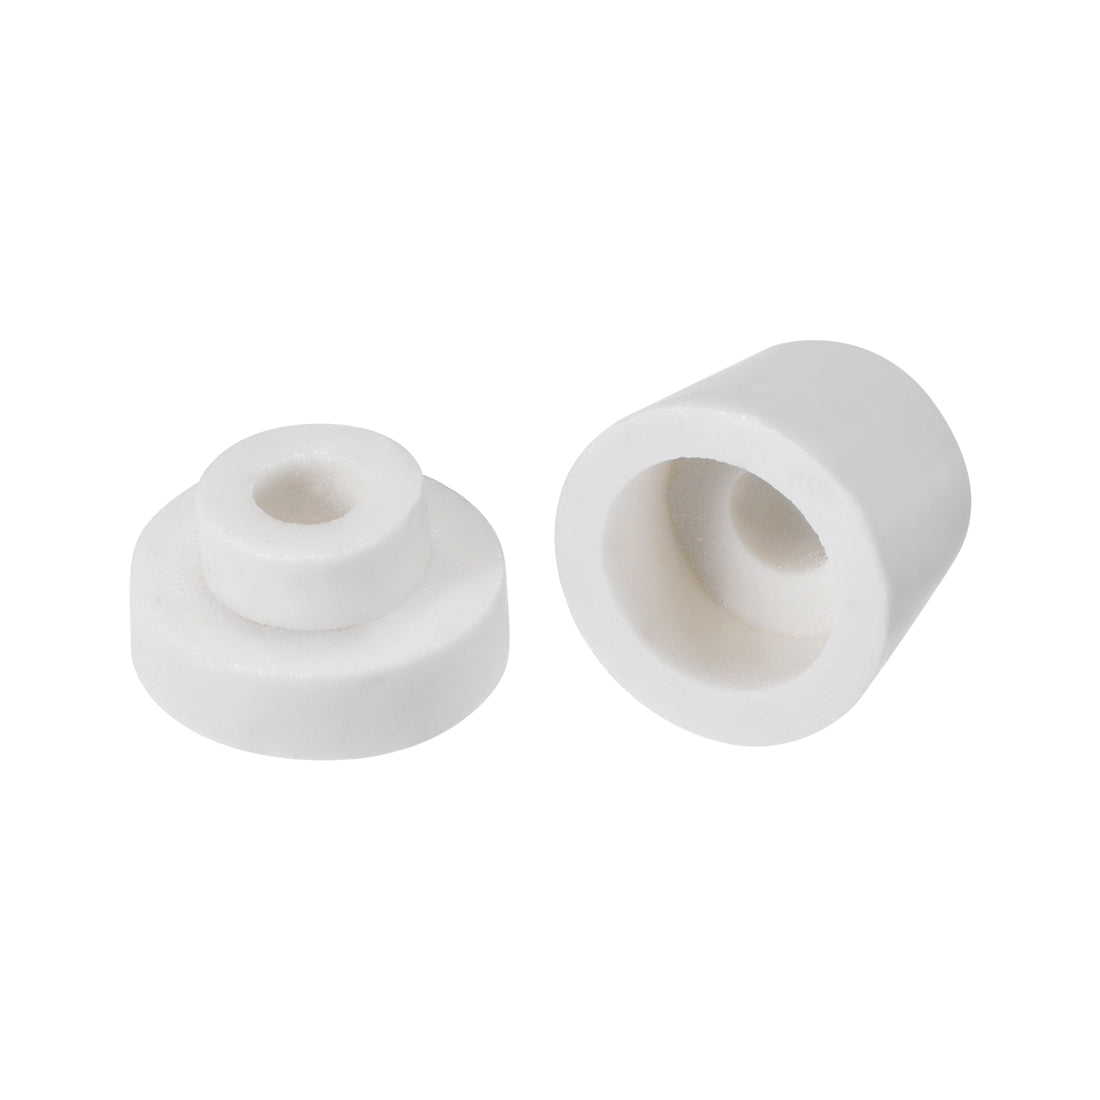 uxcell Uxcell 6.0mm Dia Ceramic Tapered Insulators Beads Alumina Porcelain Stepped Insulator for Heating Wire 2 Pcs